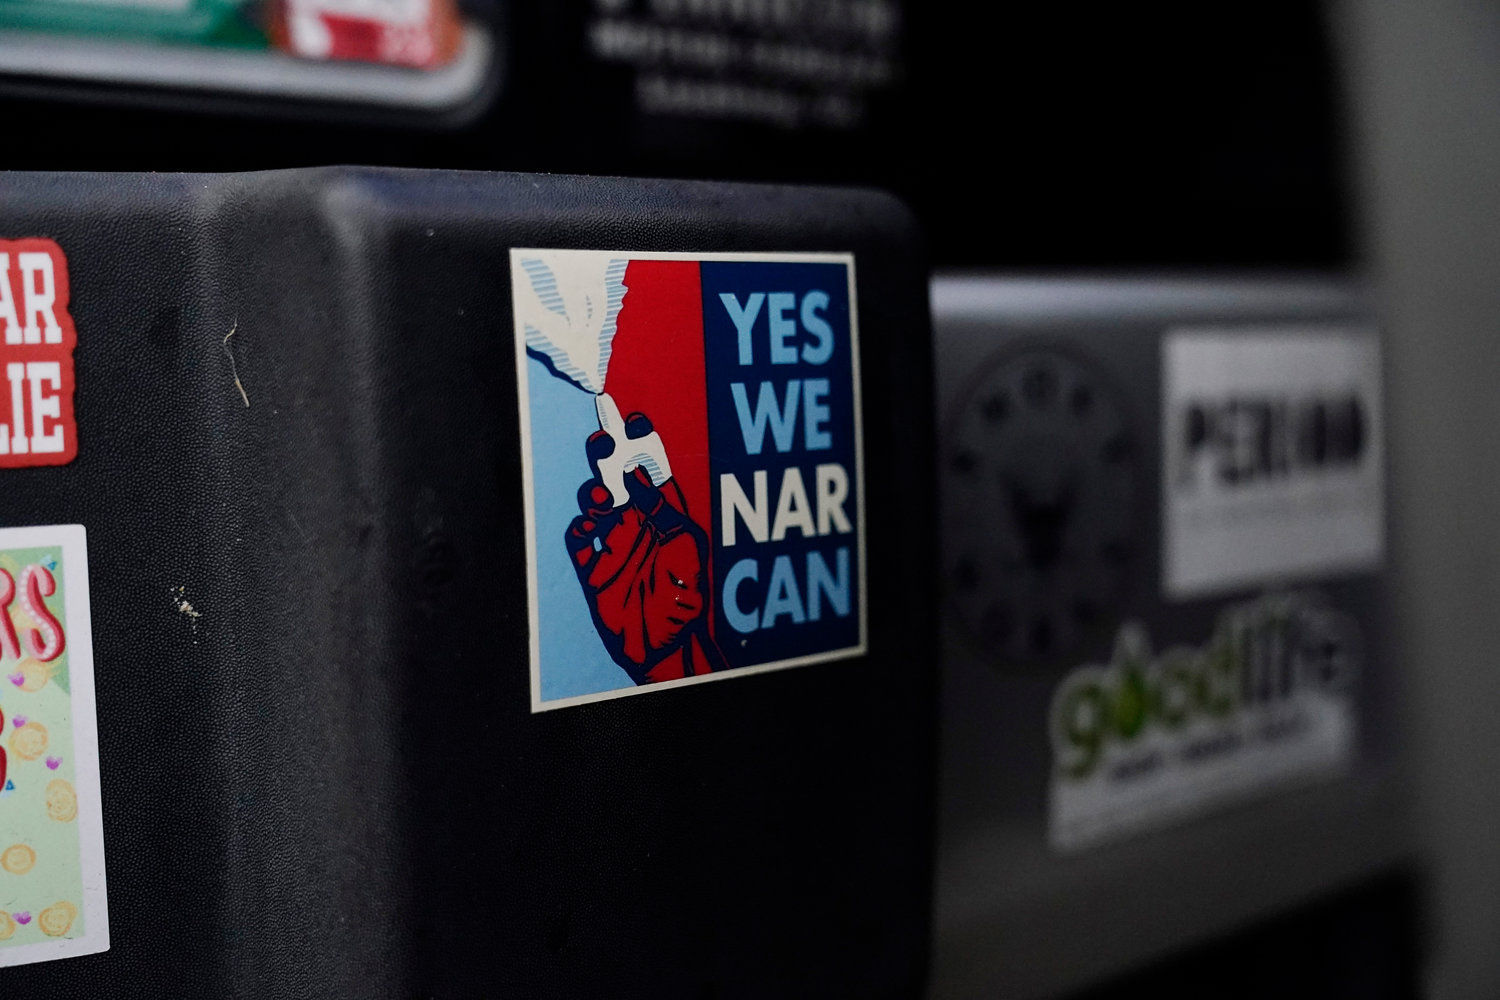 Jessie Blanchard's jeep bumper holds a sticker with the slogan "Yes We Narcan" on Monday, Jan. 23, 2023, in Albany, Ga. Naloxone, available as a nasal spray and in an injectable form, is a key tool in the battle against a nationwide overdose crisis linked to the deaths of more than 100,000 people annually in the U.S.